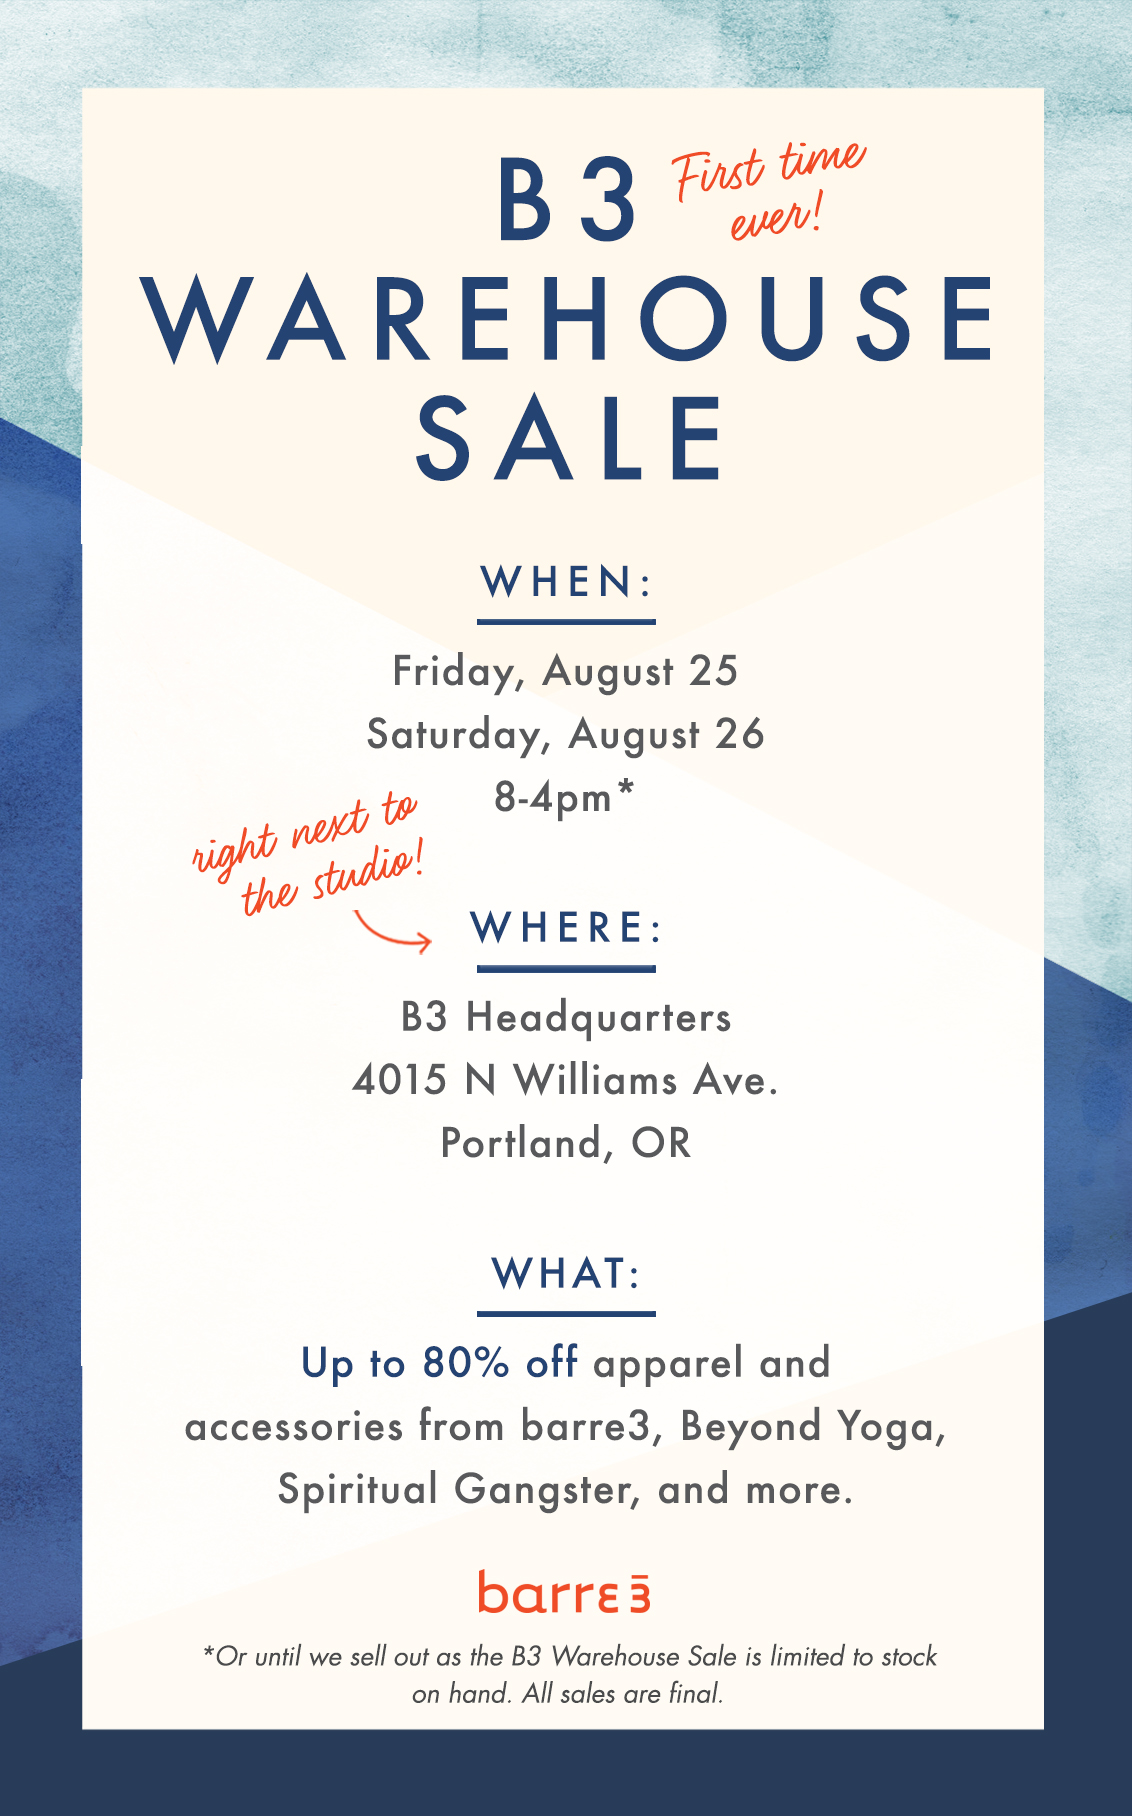 FIRST TIME EVER: B3 WAREHOUSE SALE